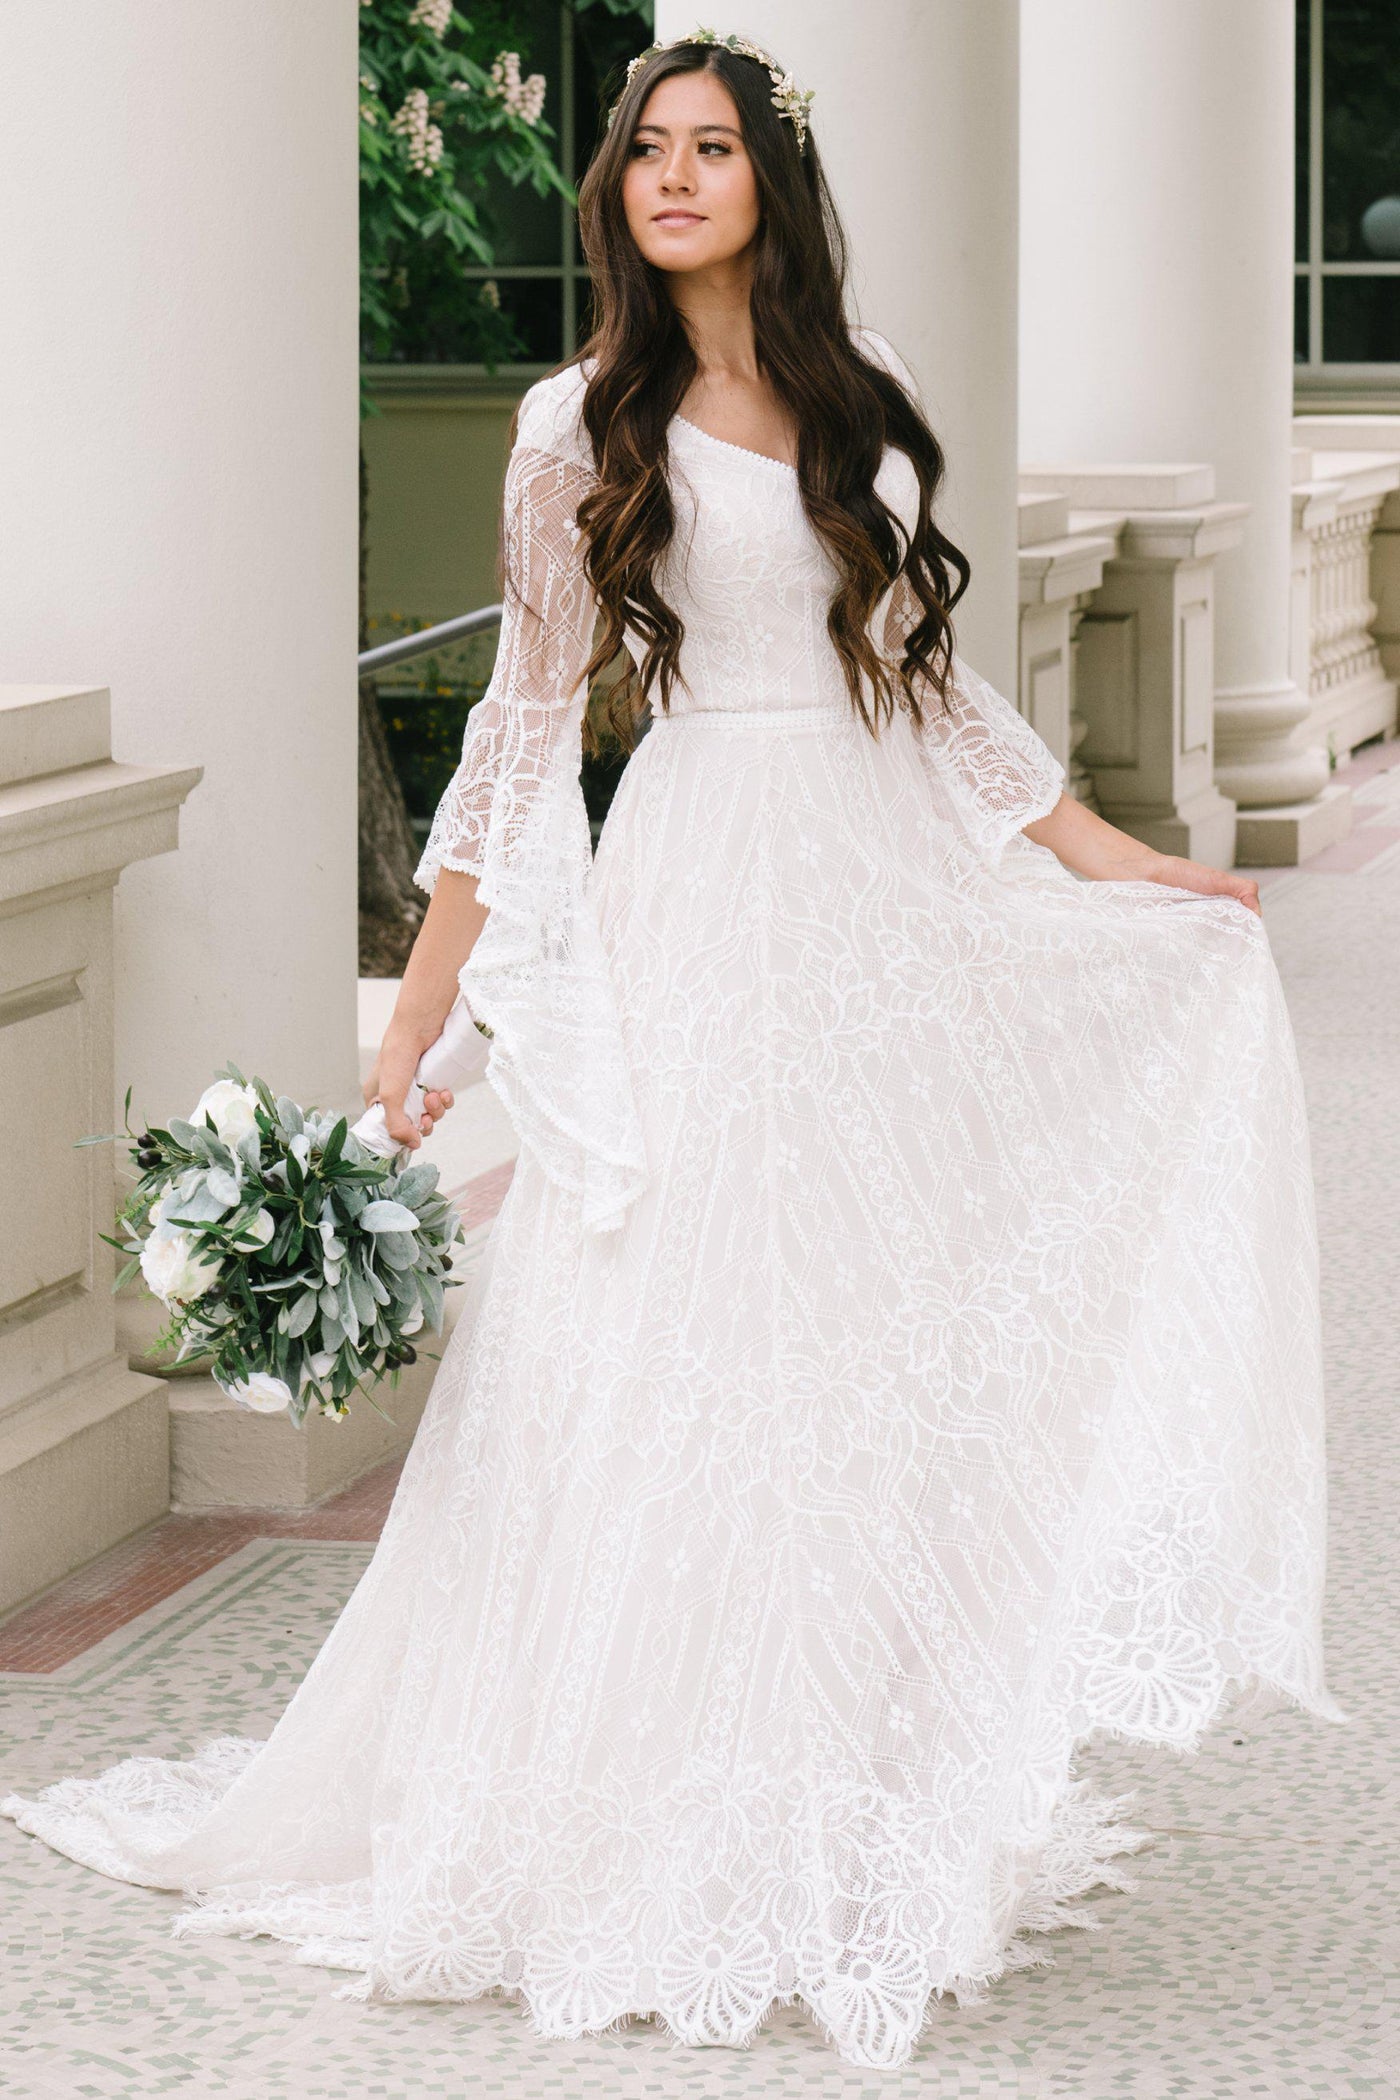 Modest wedding dress, Soft a-line laced dress with quarterly length flowing sleeves from salt lake city utah bridal shop